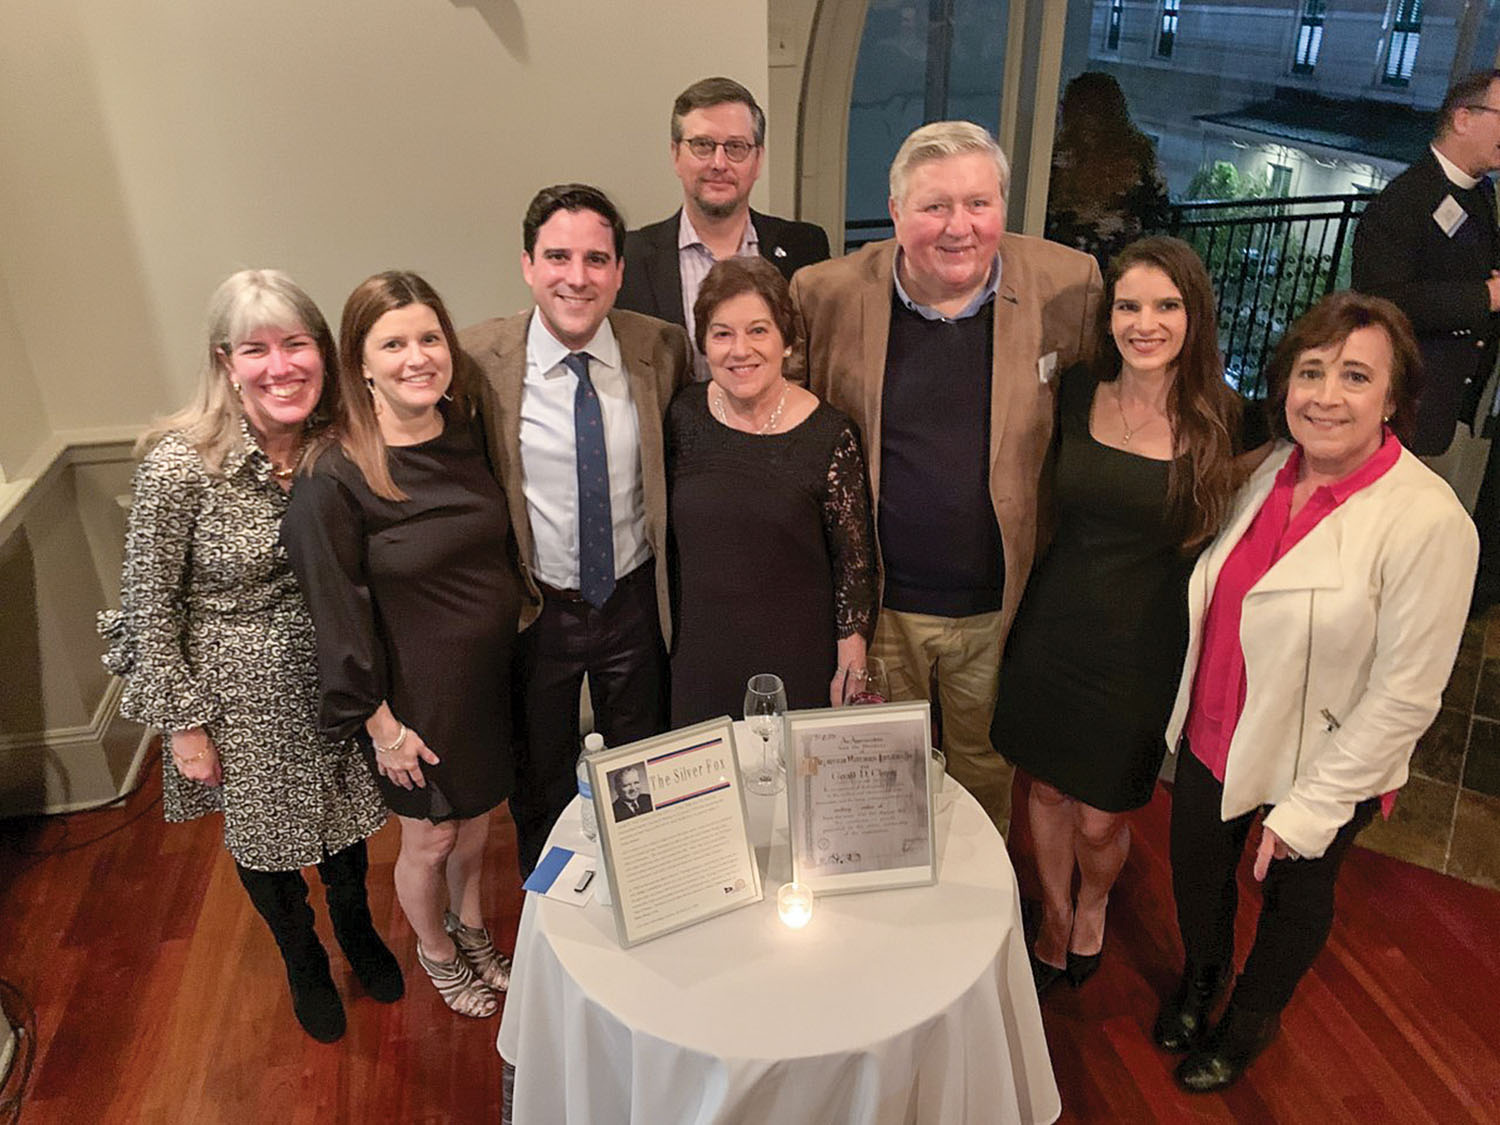 Celebrating Harbor Towing & Fleeting’s 50th anniversary during the recent AWO meeting in New Orleans are, from left, Jennifer Carpenter, Renée Clower, Todd G. Clower, Michael Nation, Pamela Clower, Jerry Clower, Wendy Hymel and Debbie Wills. (Photo courtesy of Harbor Towing & Fleeting)